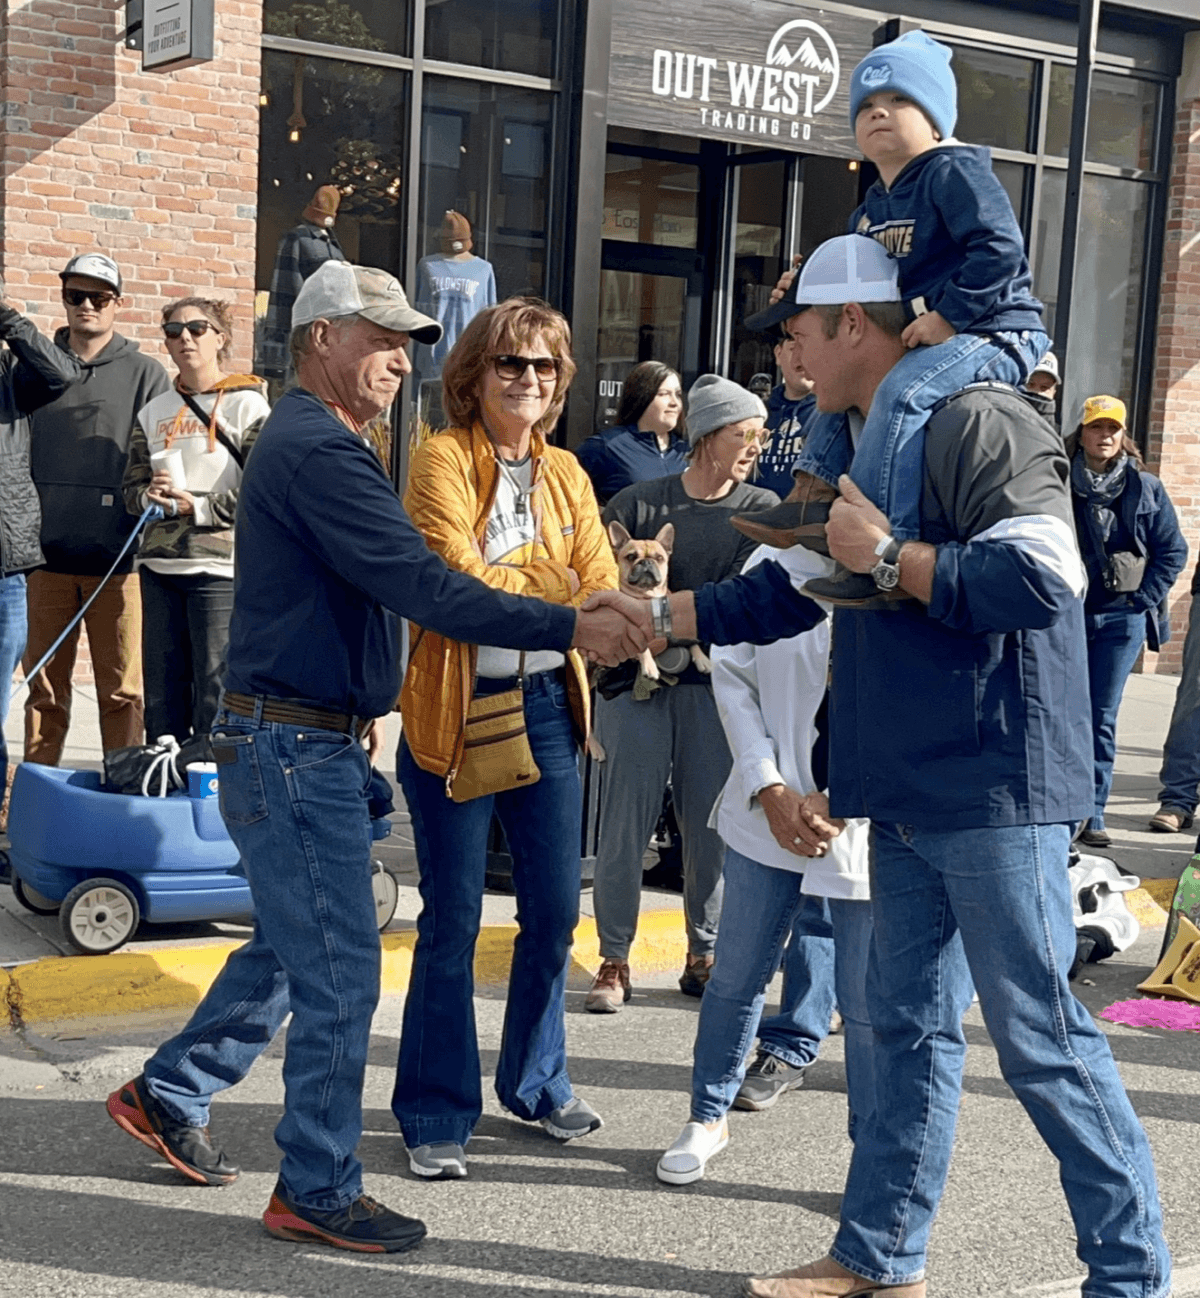 Montana Republican U.S. senate candidate, with his son, Walter, riding his shoulders, greets voters in Bozeman, Montana, during Montana State University’s Sept. 30 Homecoming parade. (Sheehy For Montana)